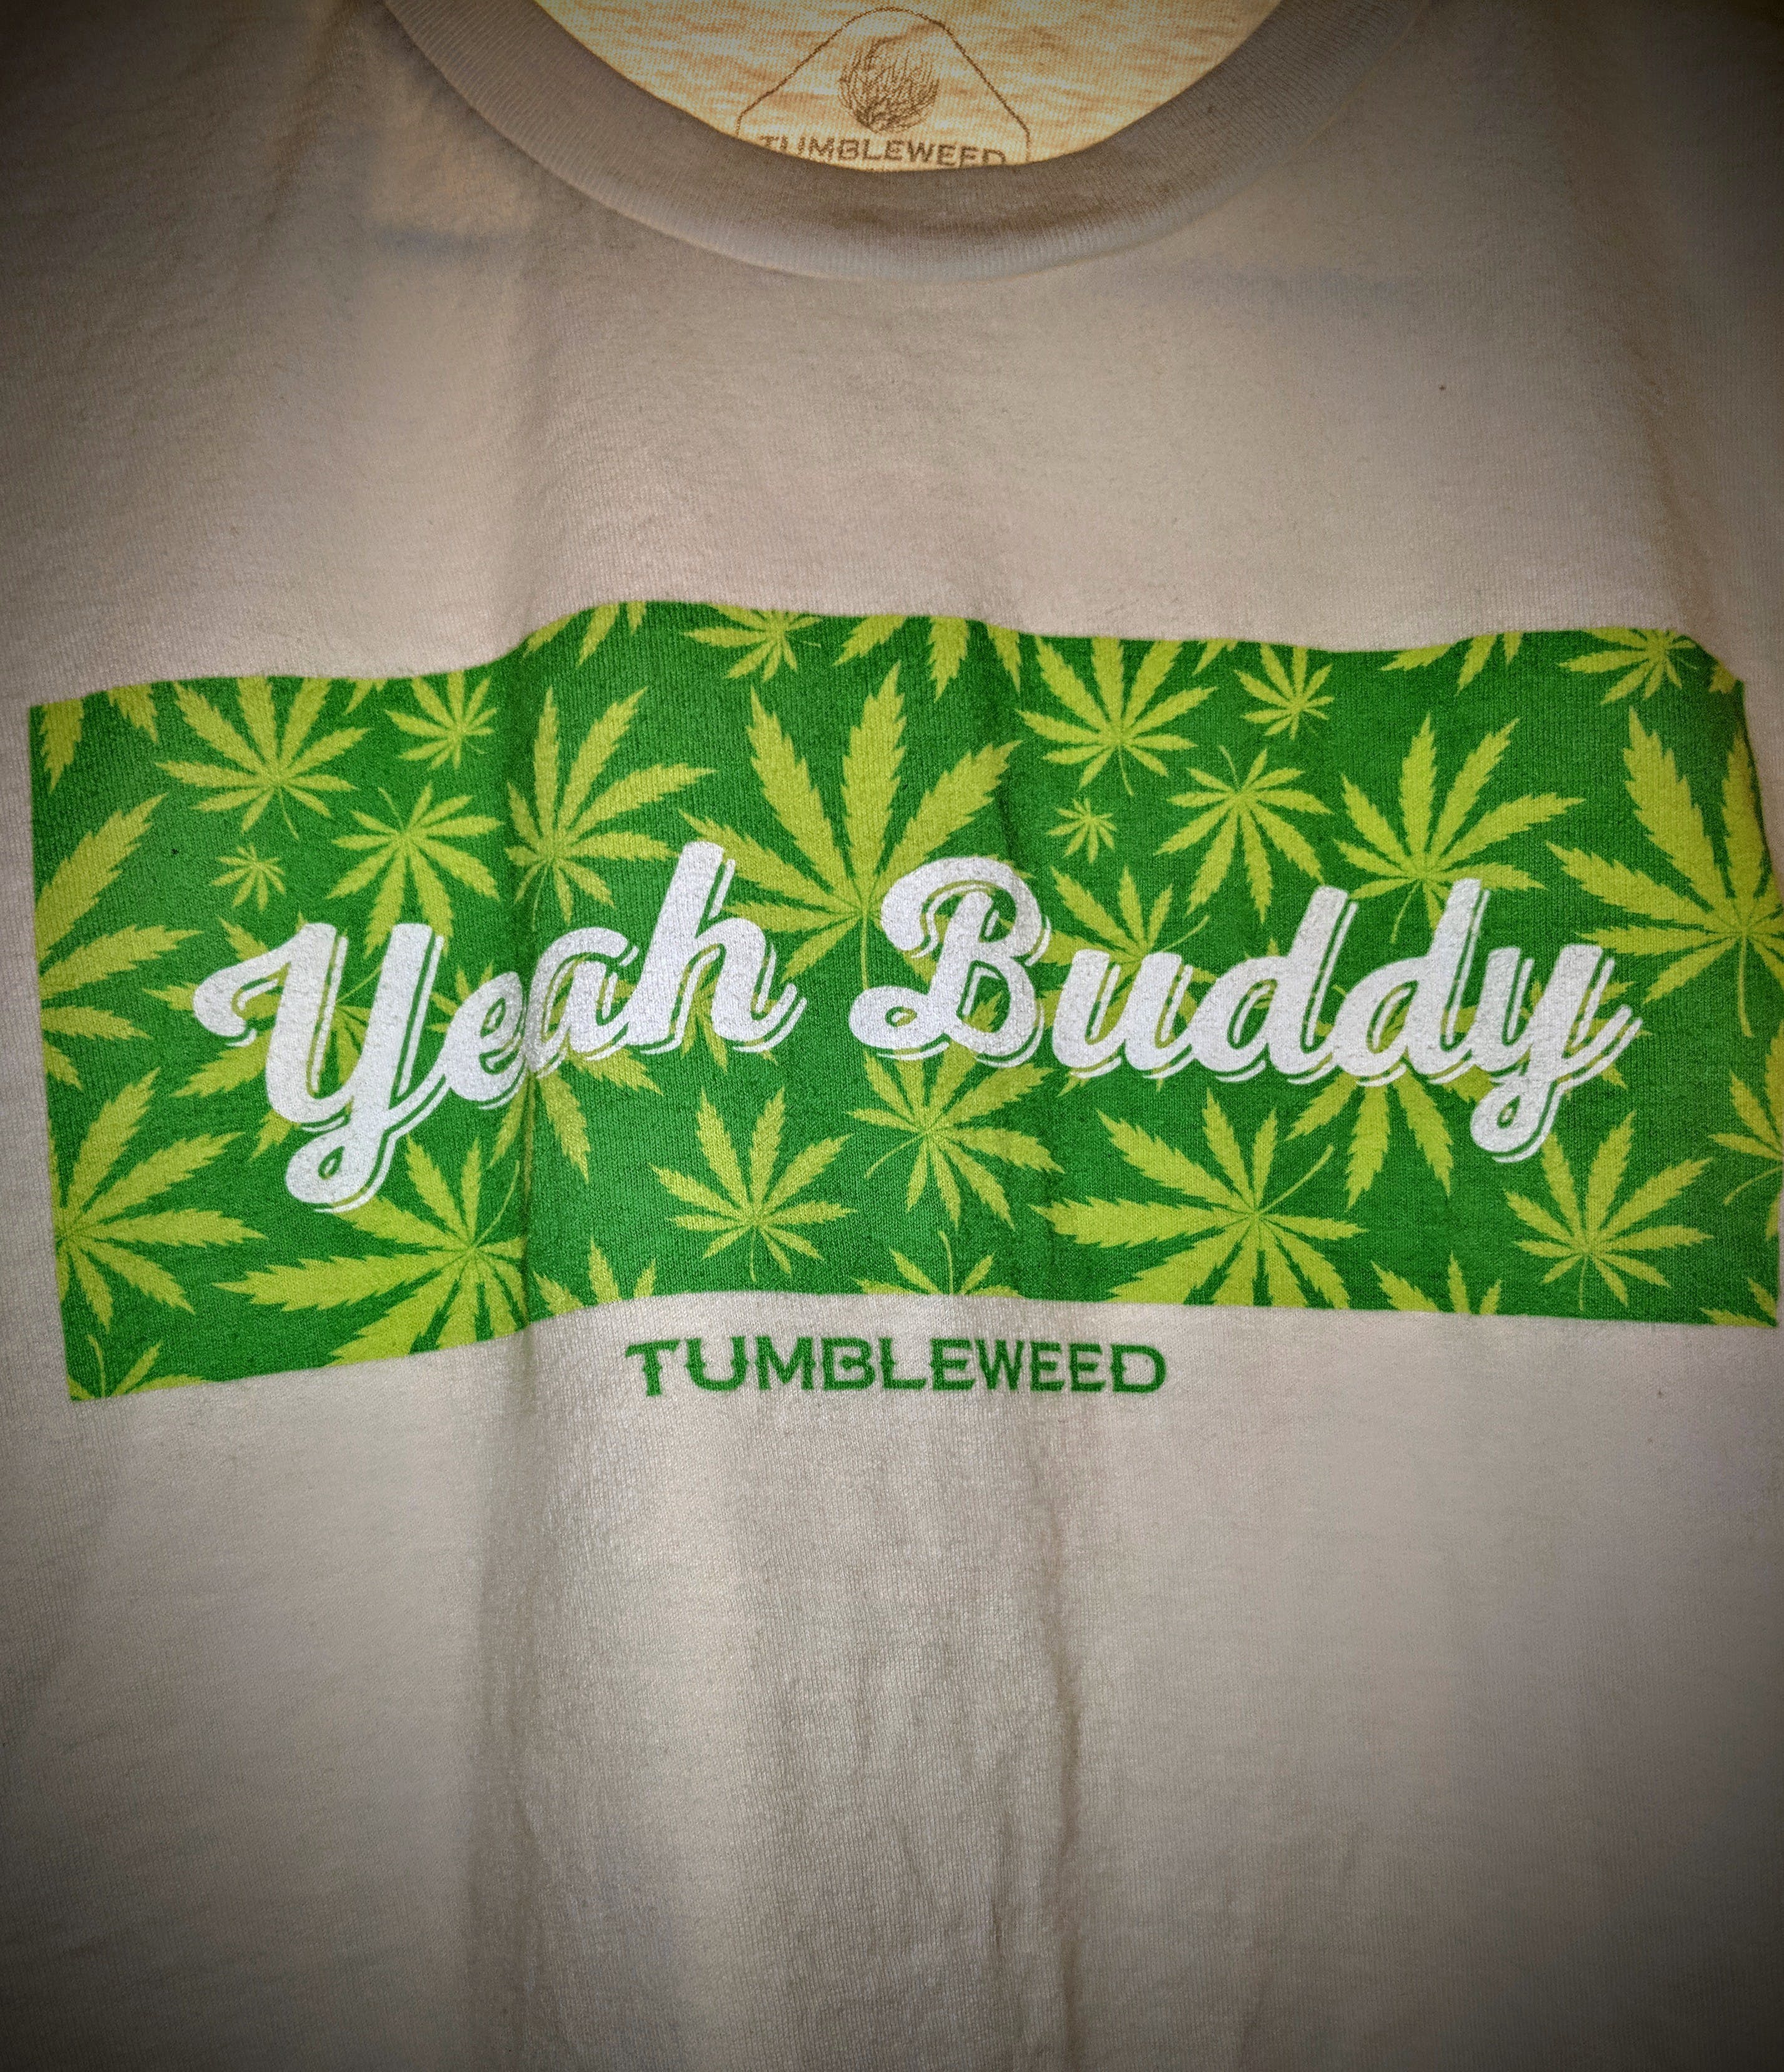 gear-tumbleweed-official-swag-yeah-buddy-t-shirts